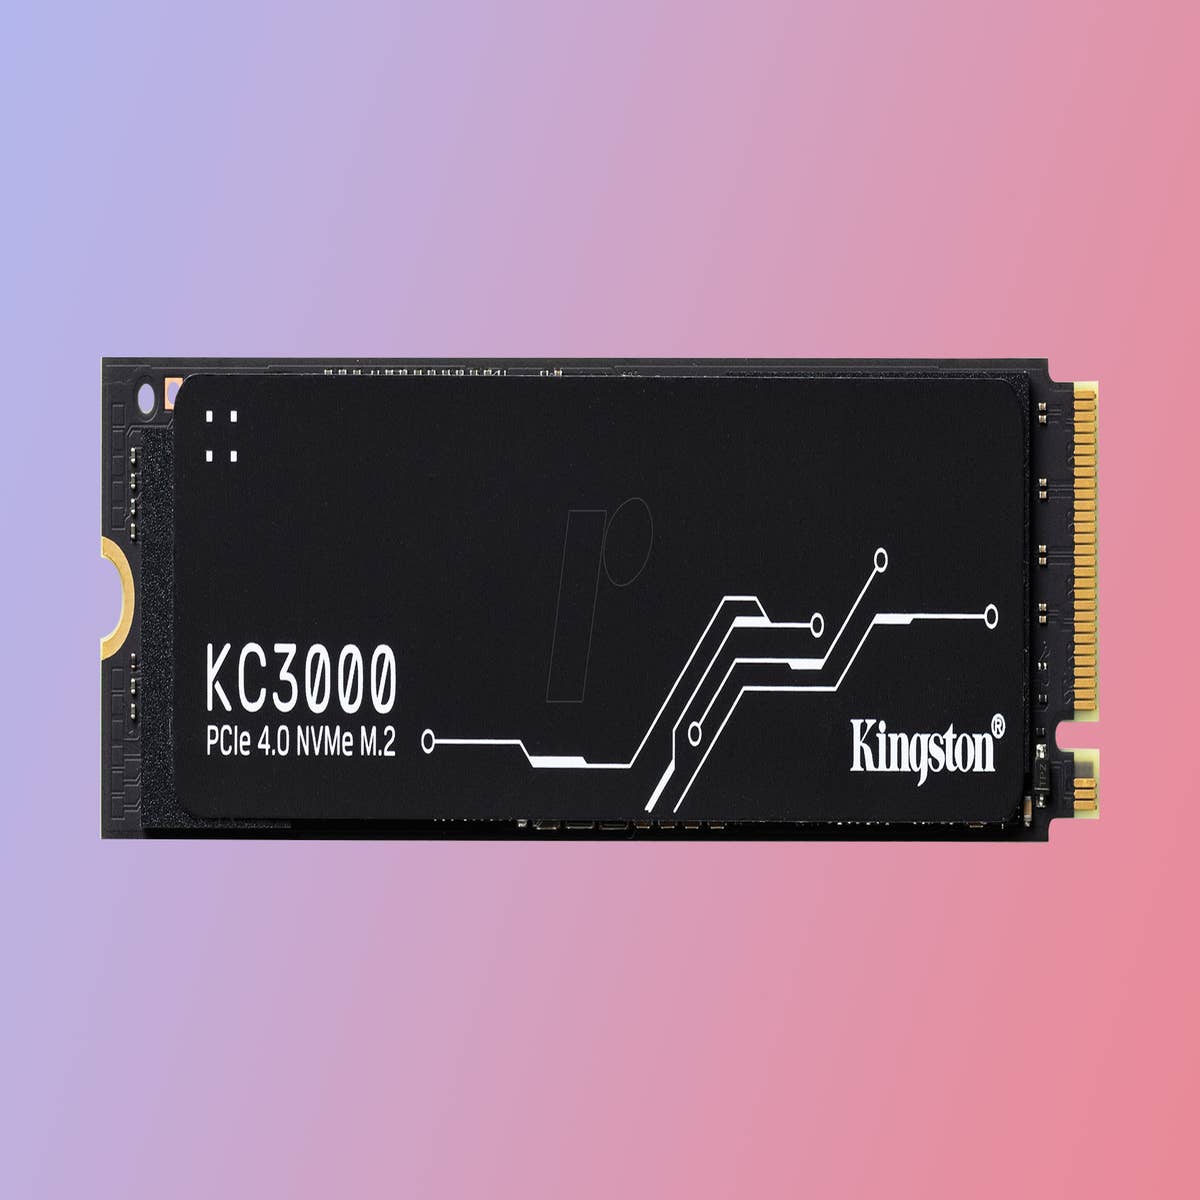 Kingston KC3000 1TB Review (Page 2 of 10)